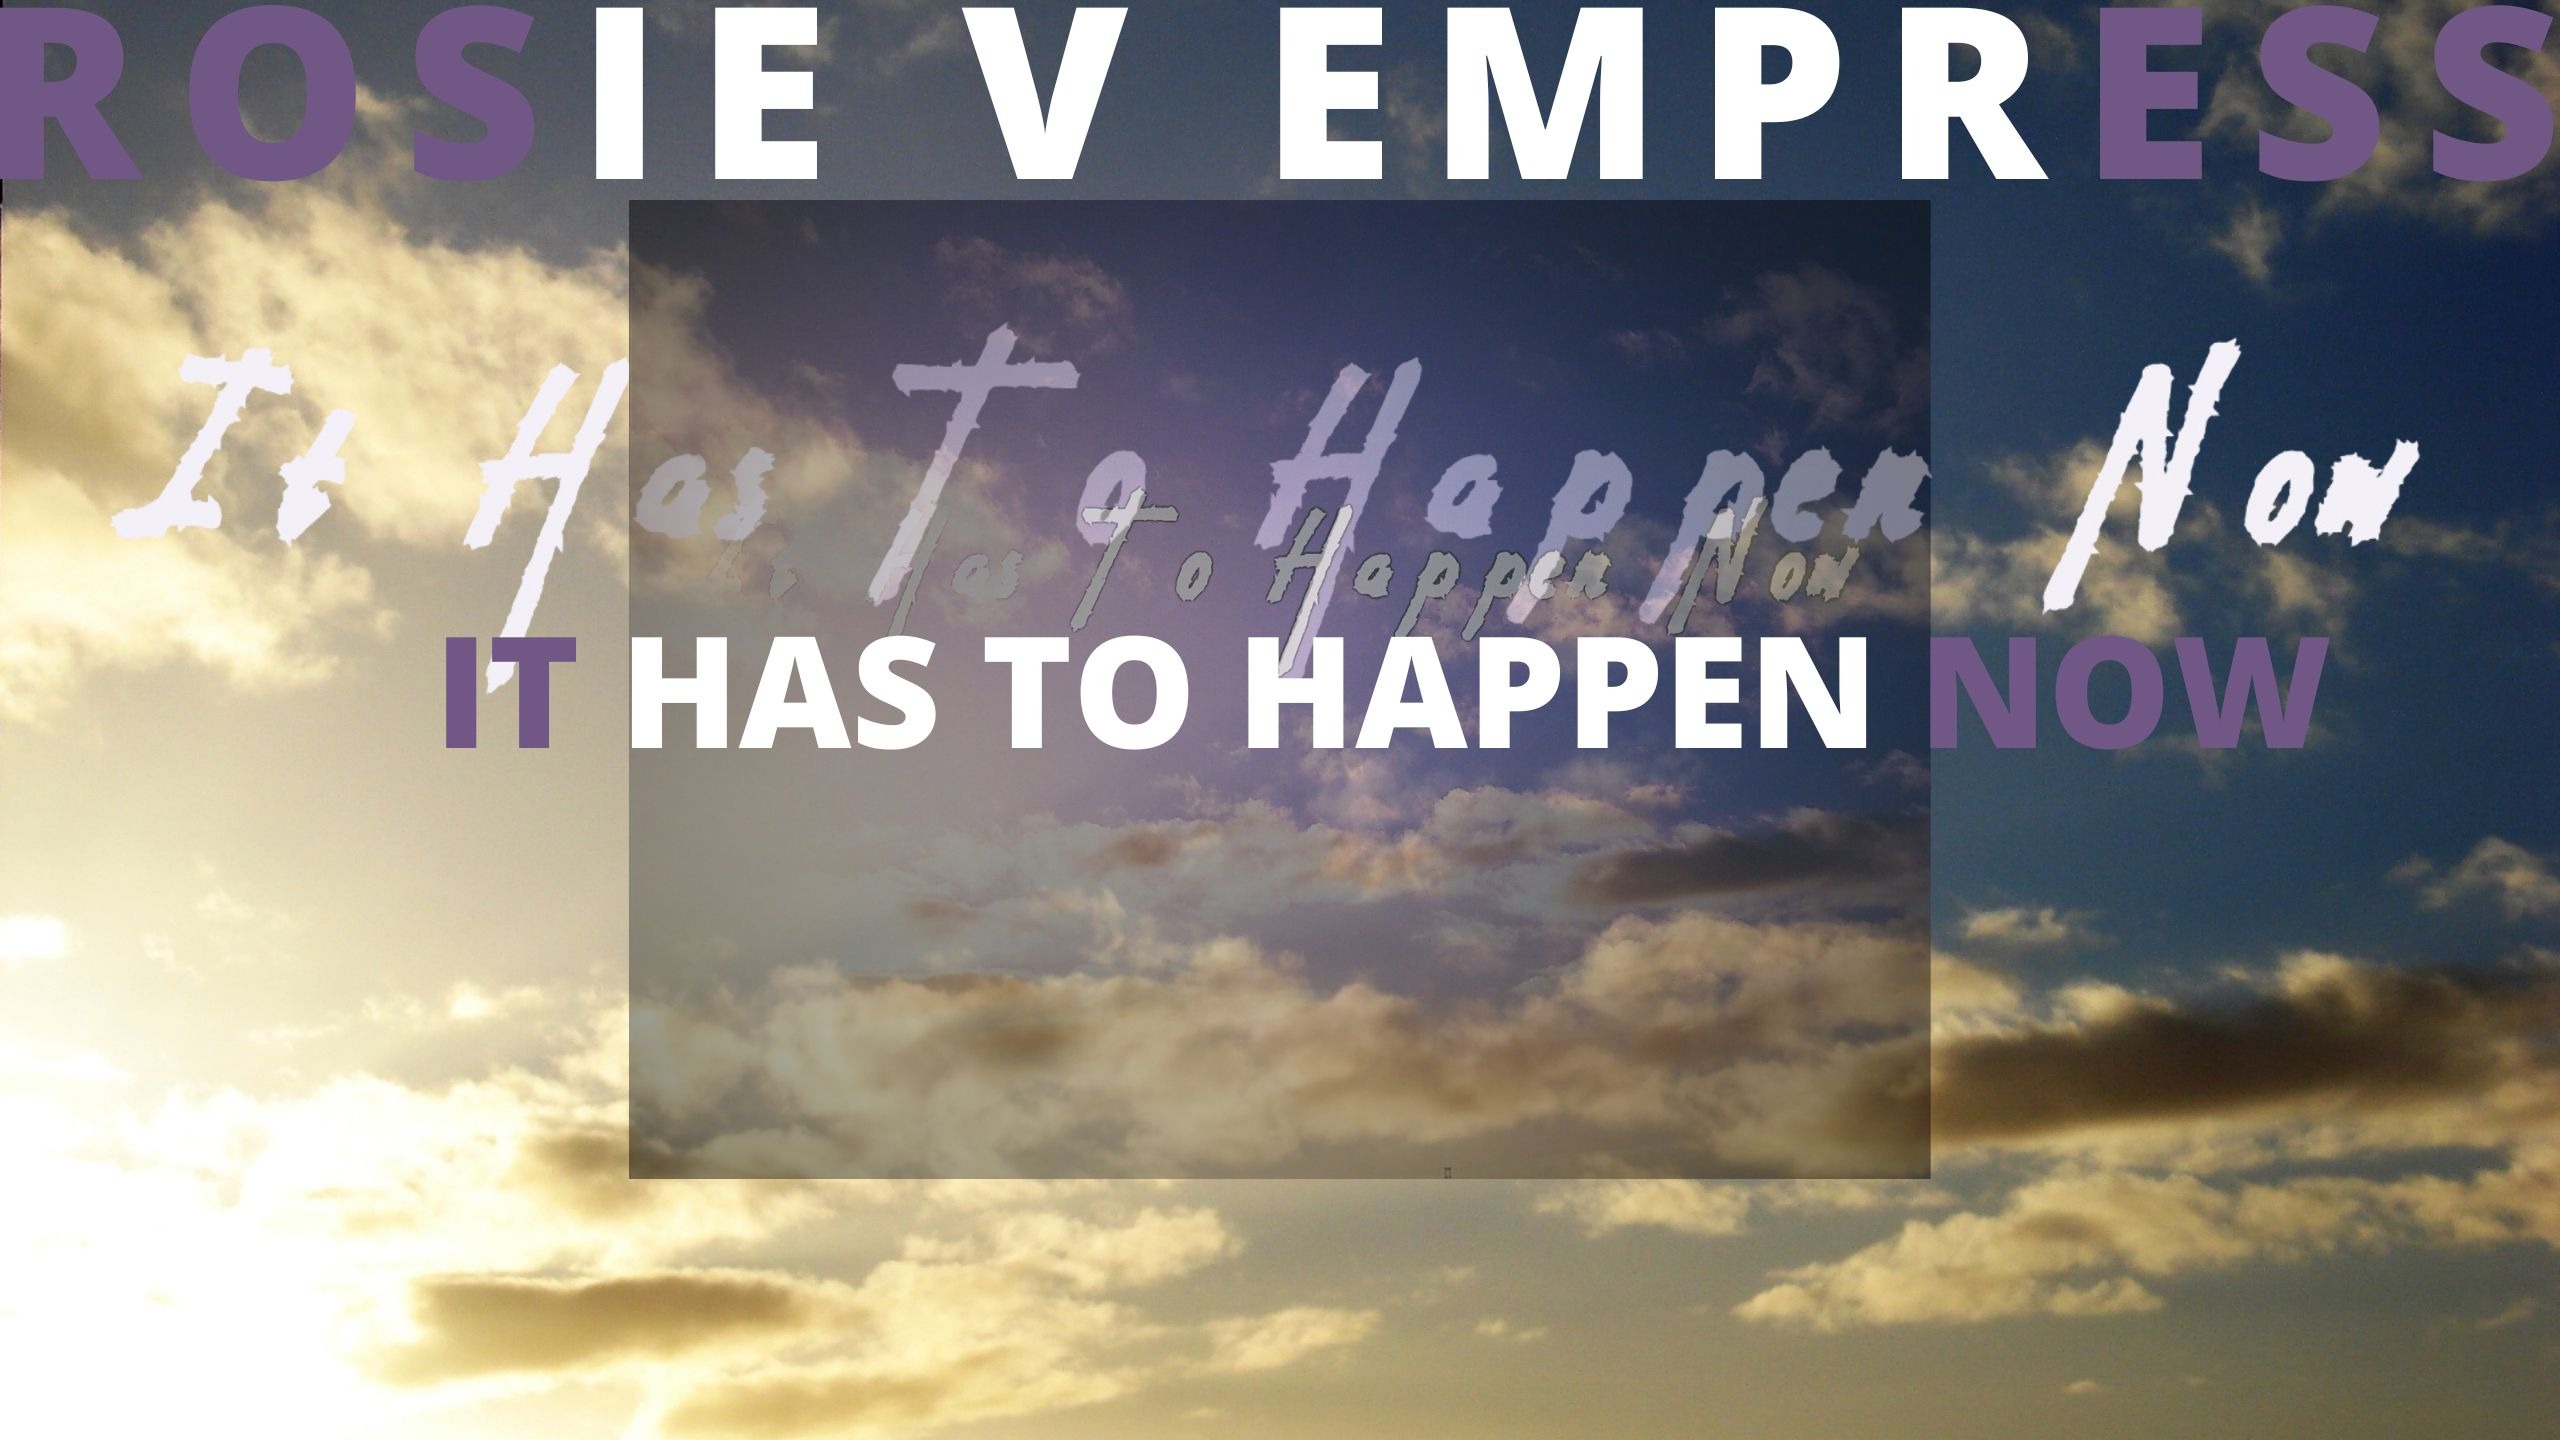 Enthralling Audiences with Uplifting Tunes and Anticipated Releases – Soulful Sensation Rosie V Empress Presents “It Has to Happen Now”